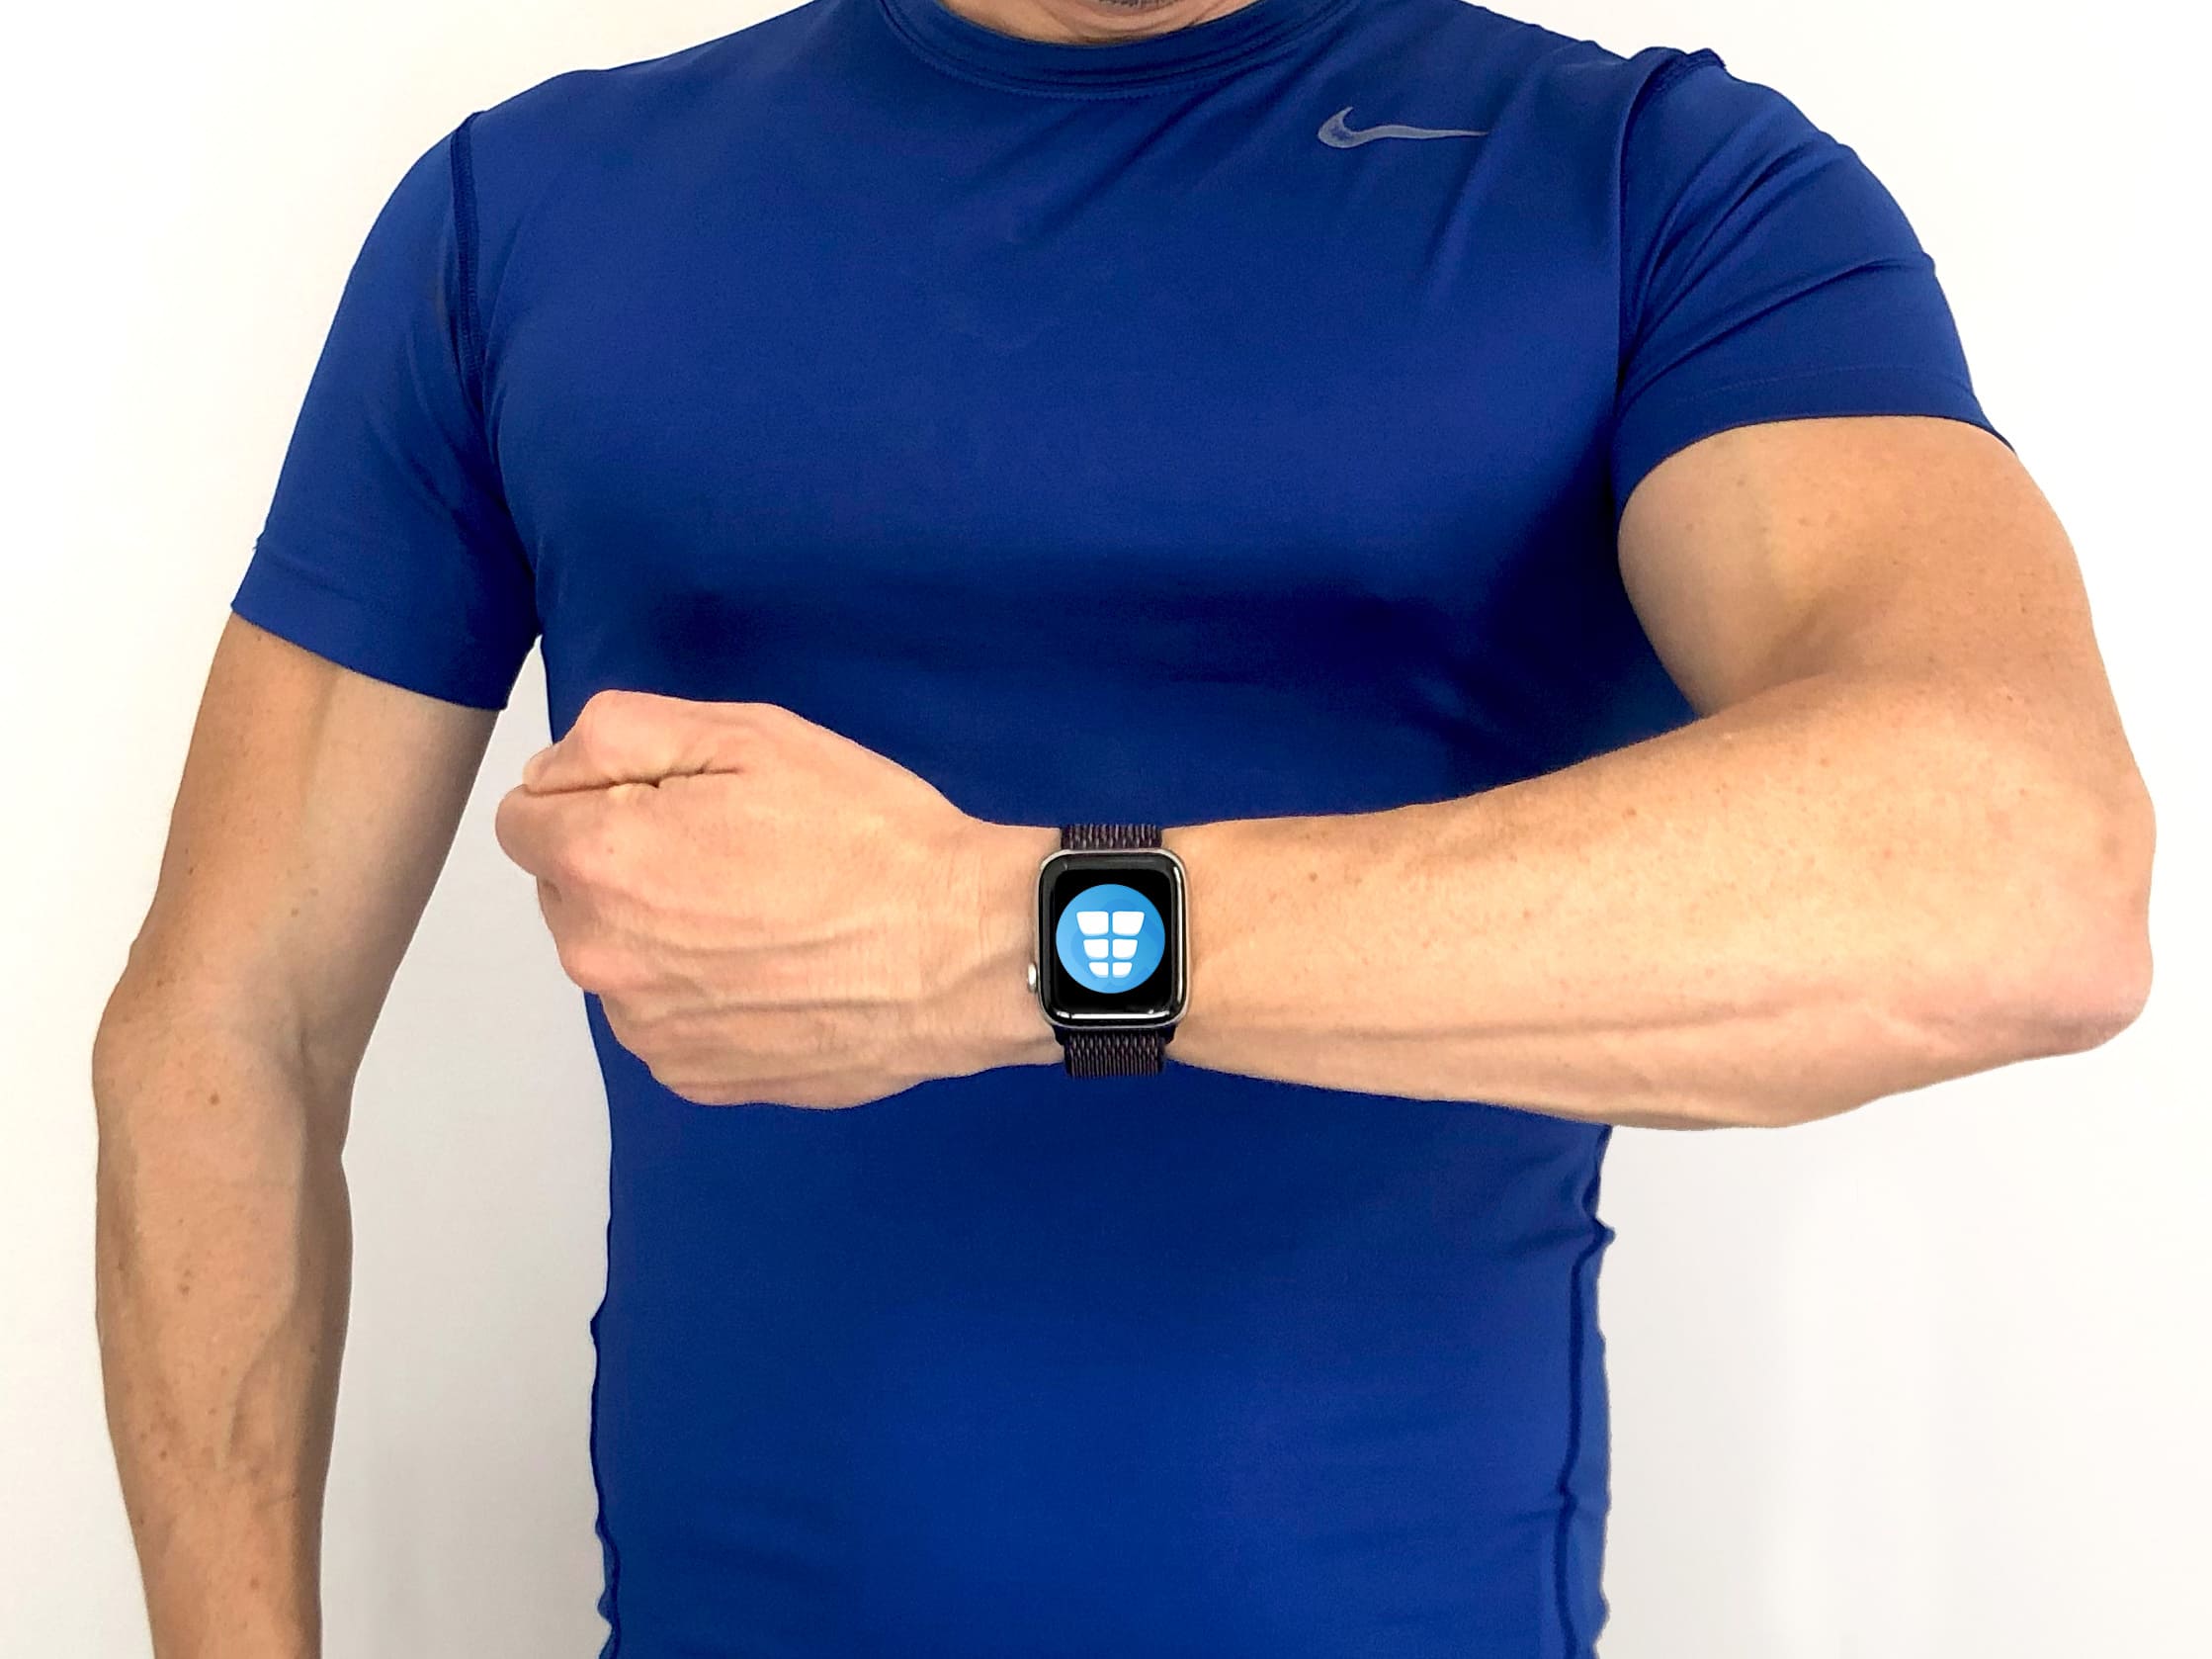 Want a more defined core? Your Apple Watch can help.